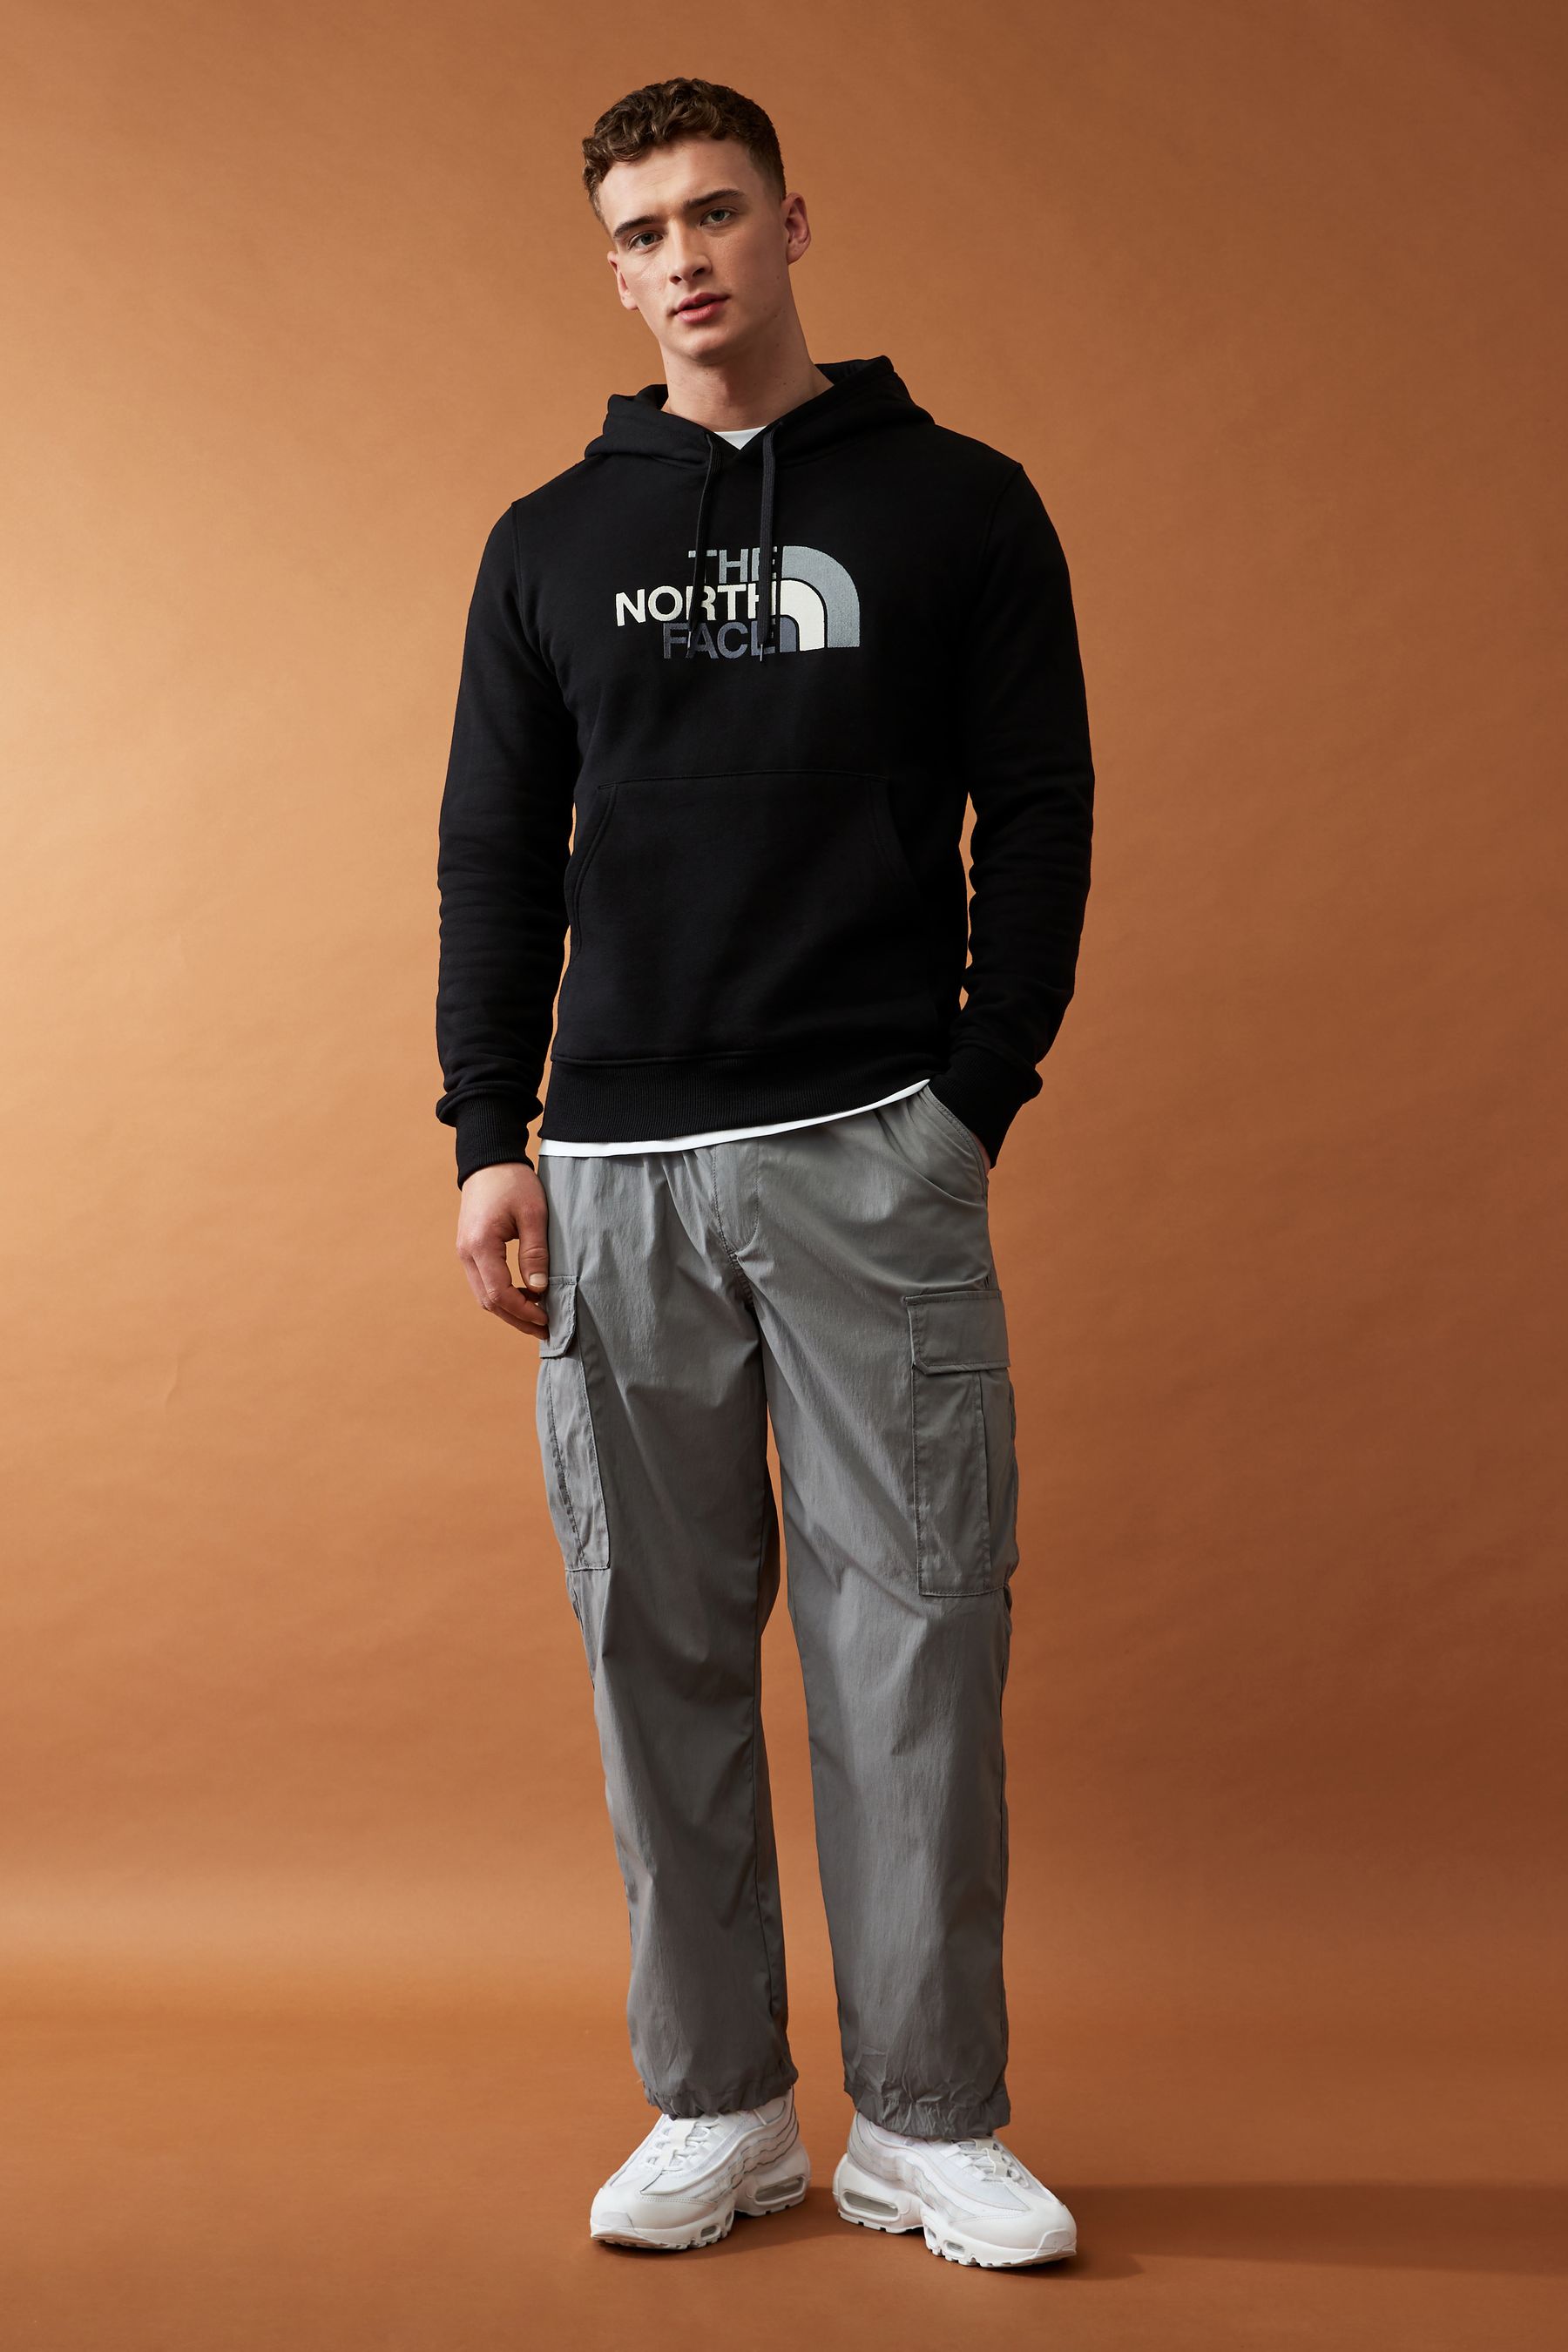 Buy The North Face Drew Peak Overhead Hoodie from the Next UK online shop